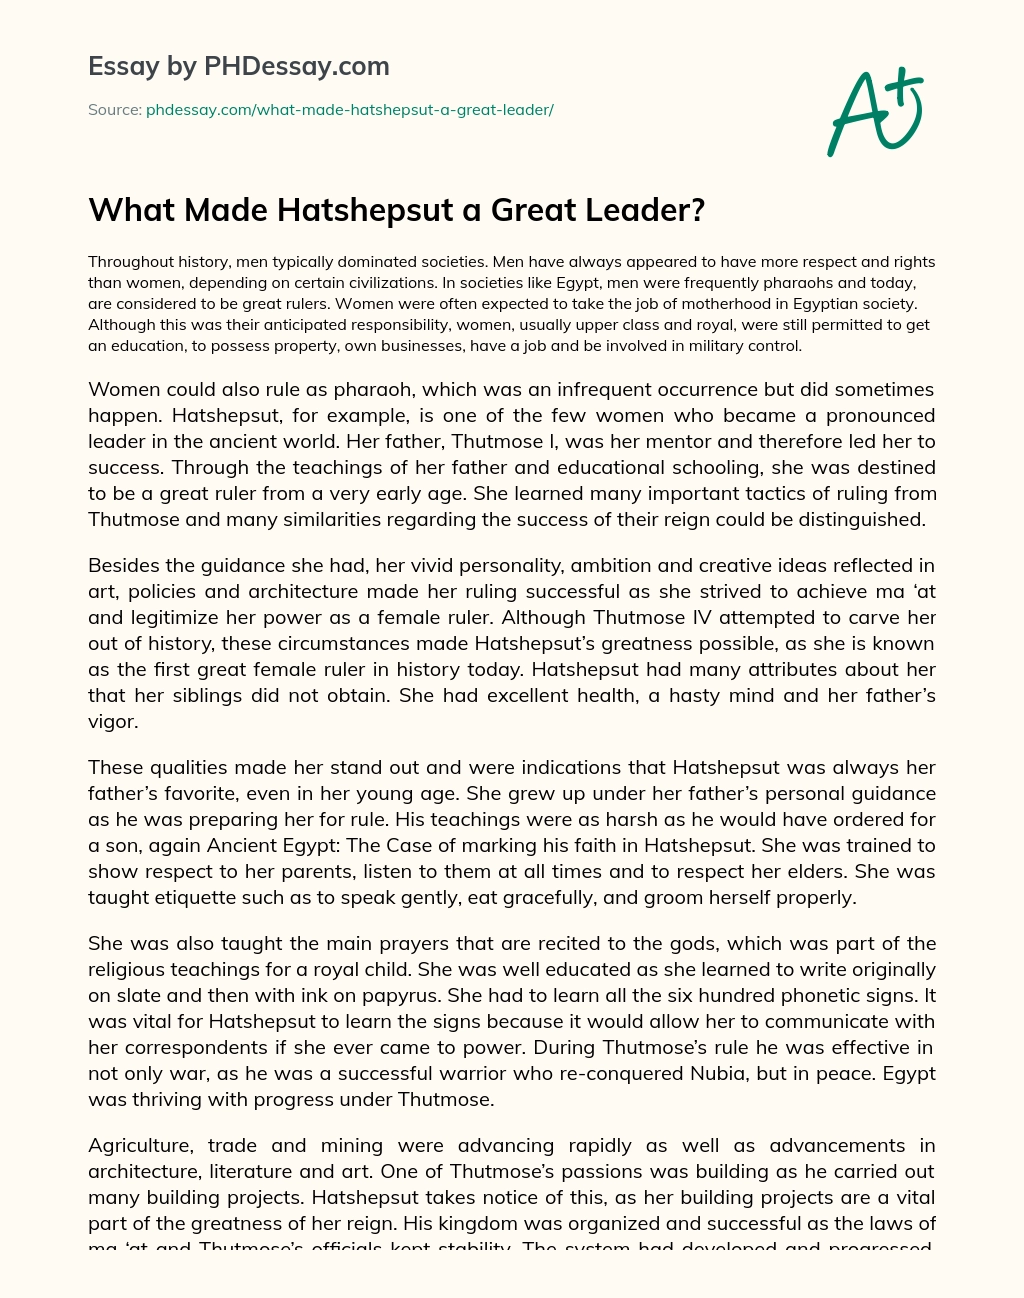 What Made Hatshepsut a Great Leader? essay